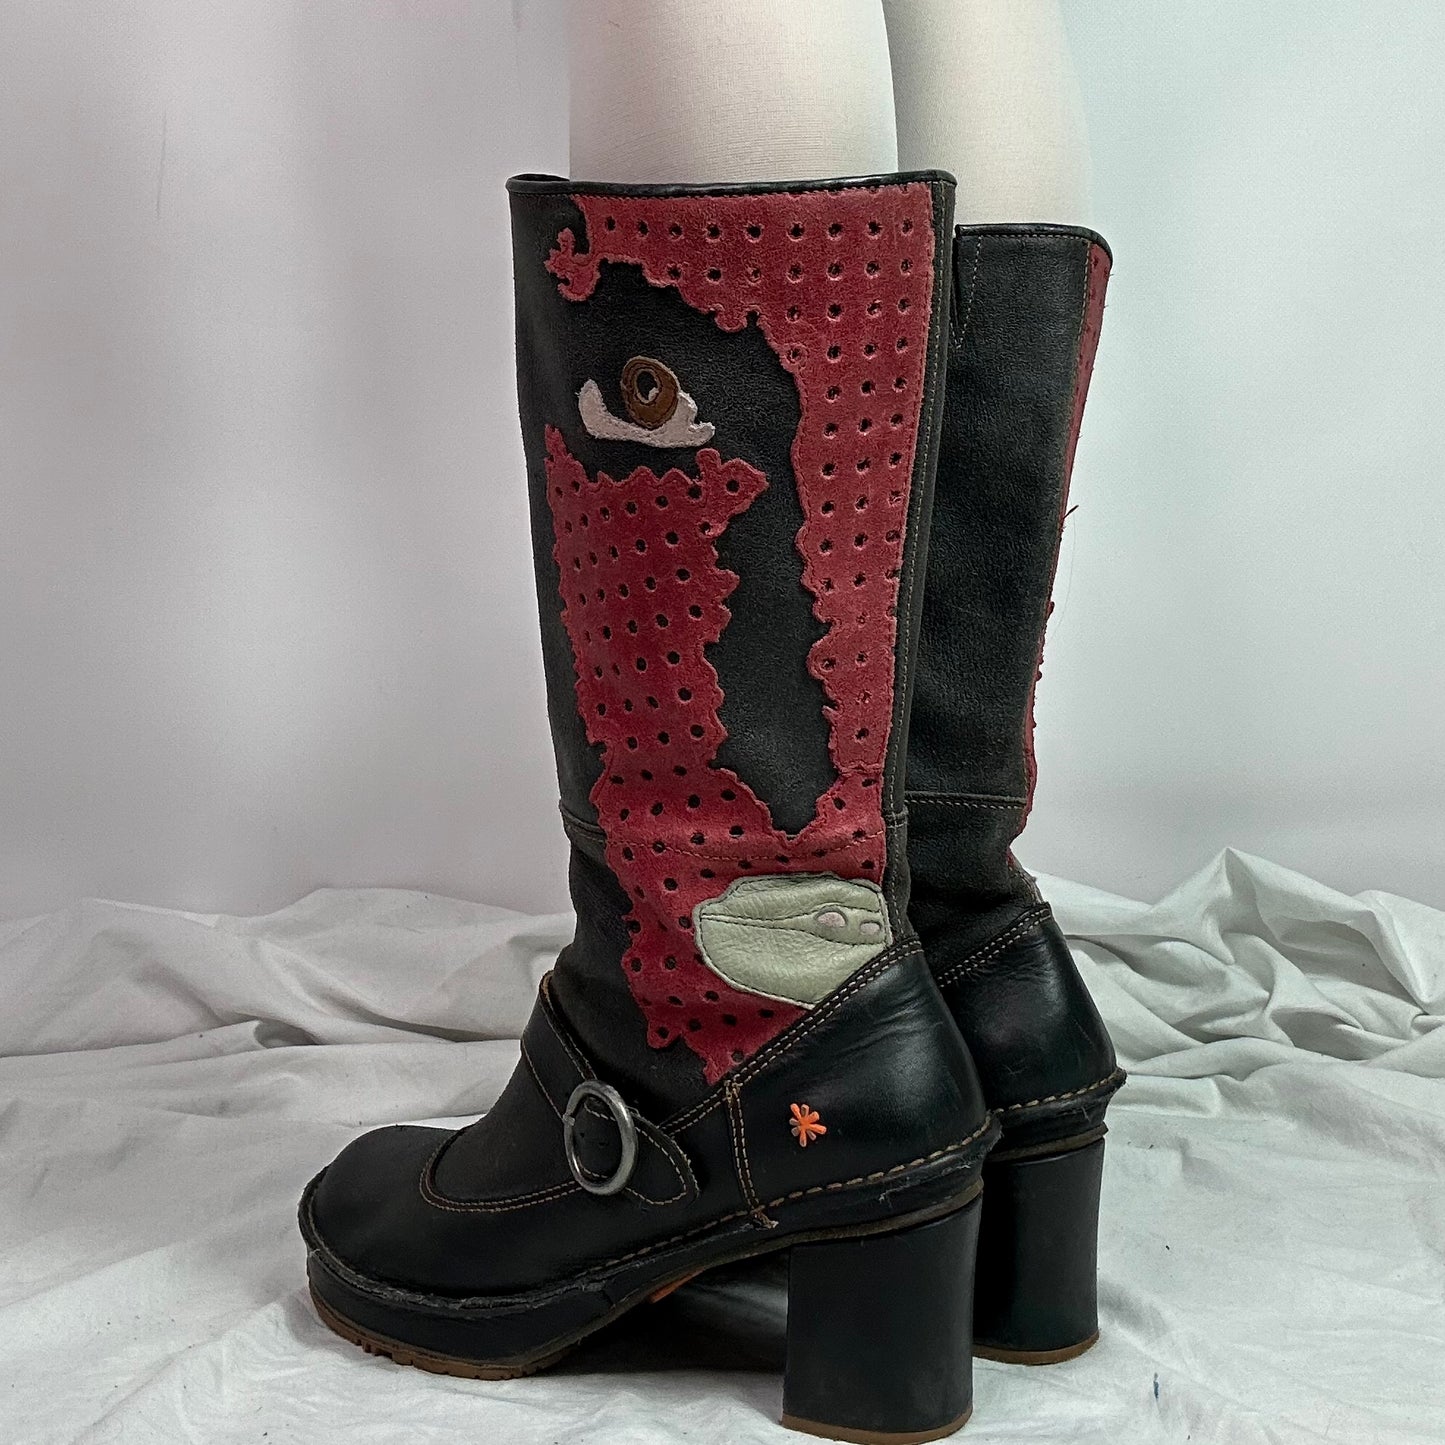 The Art Company Vintage Face Heel Boots